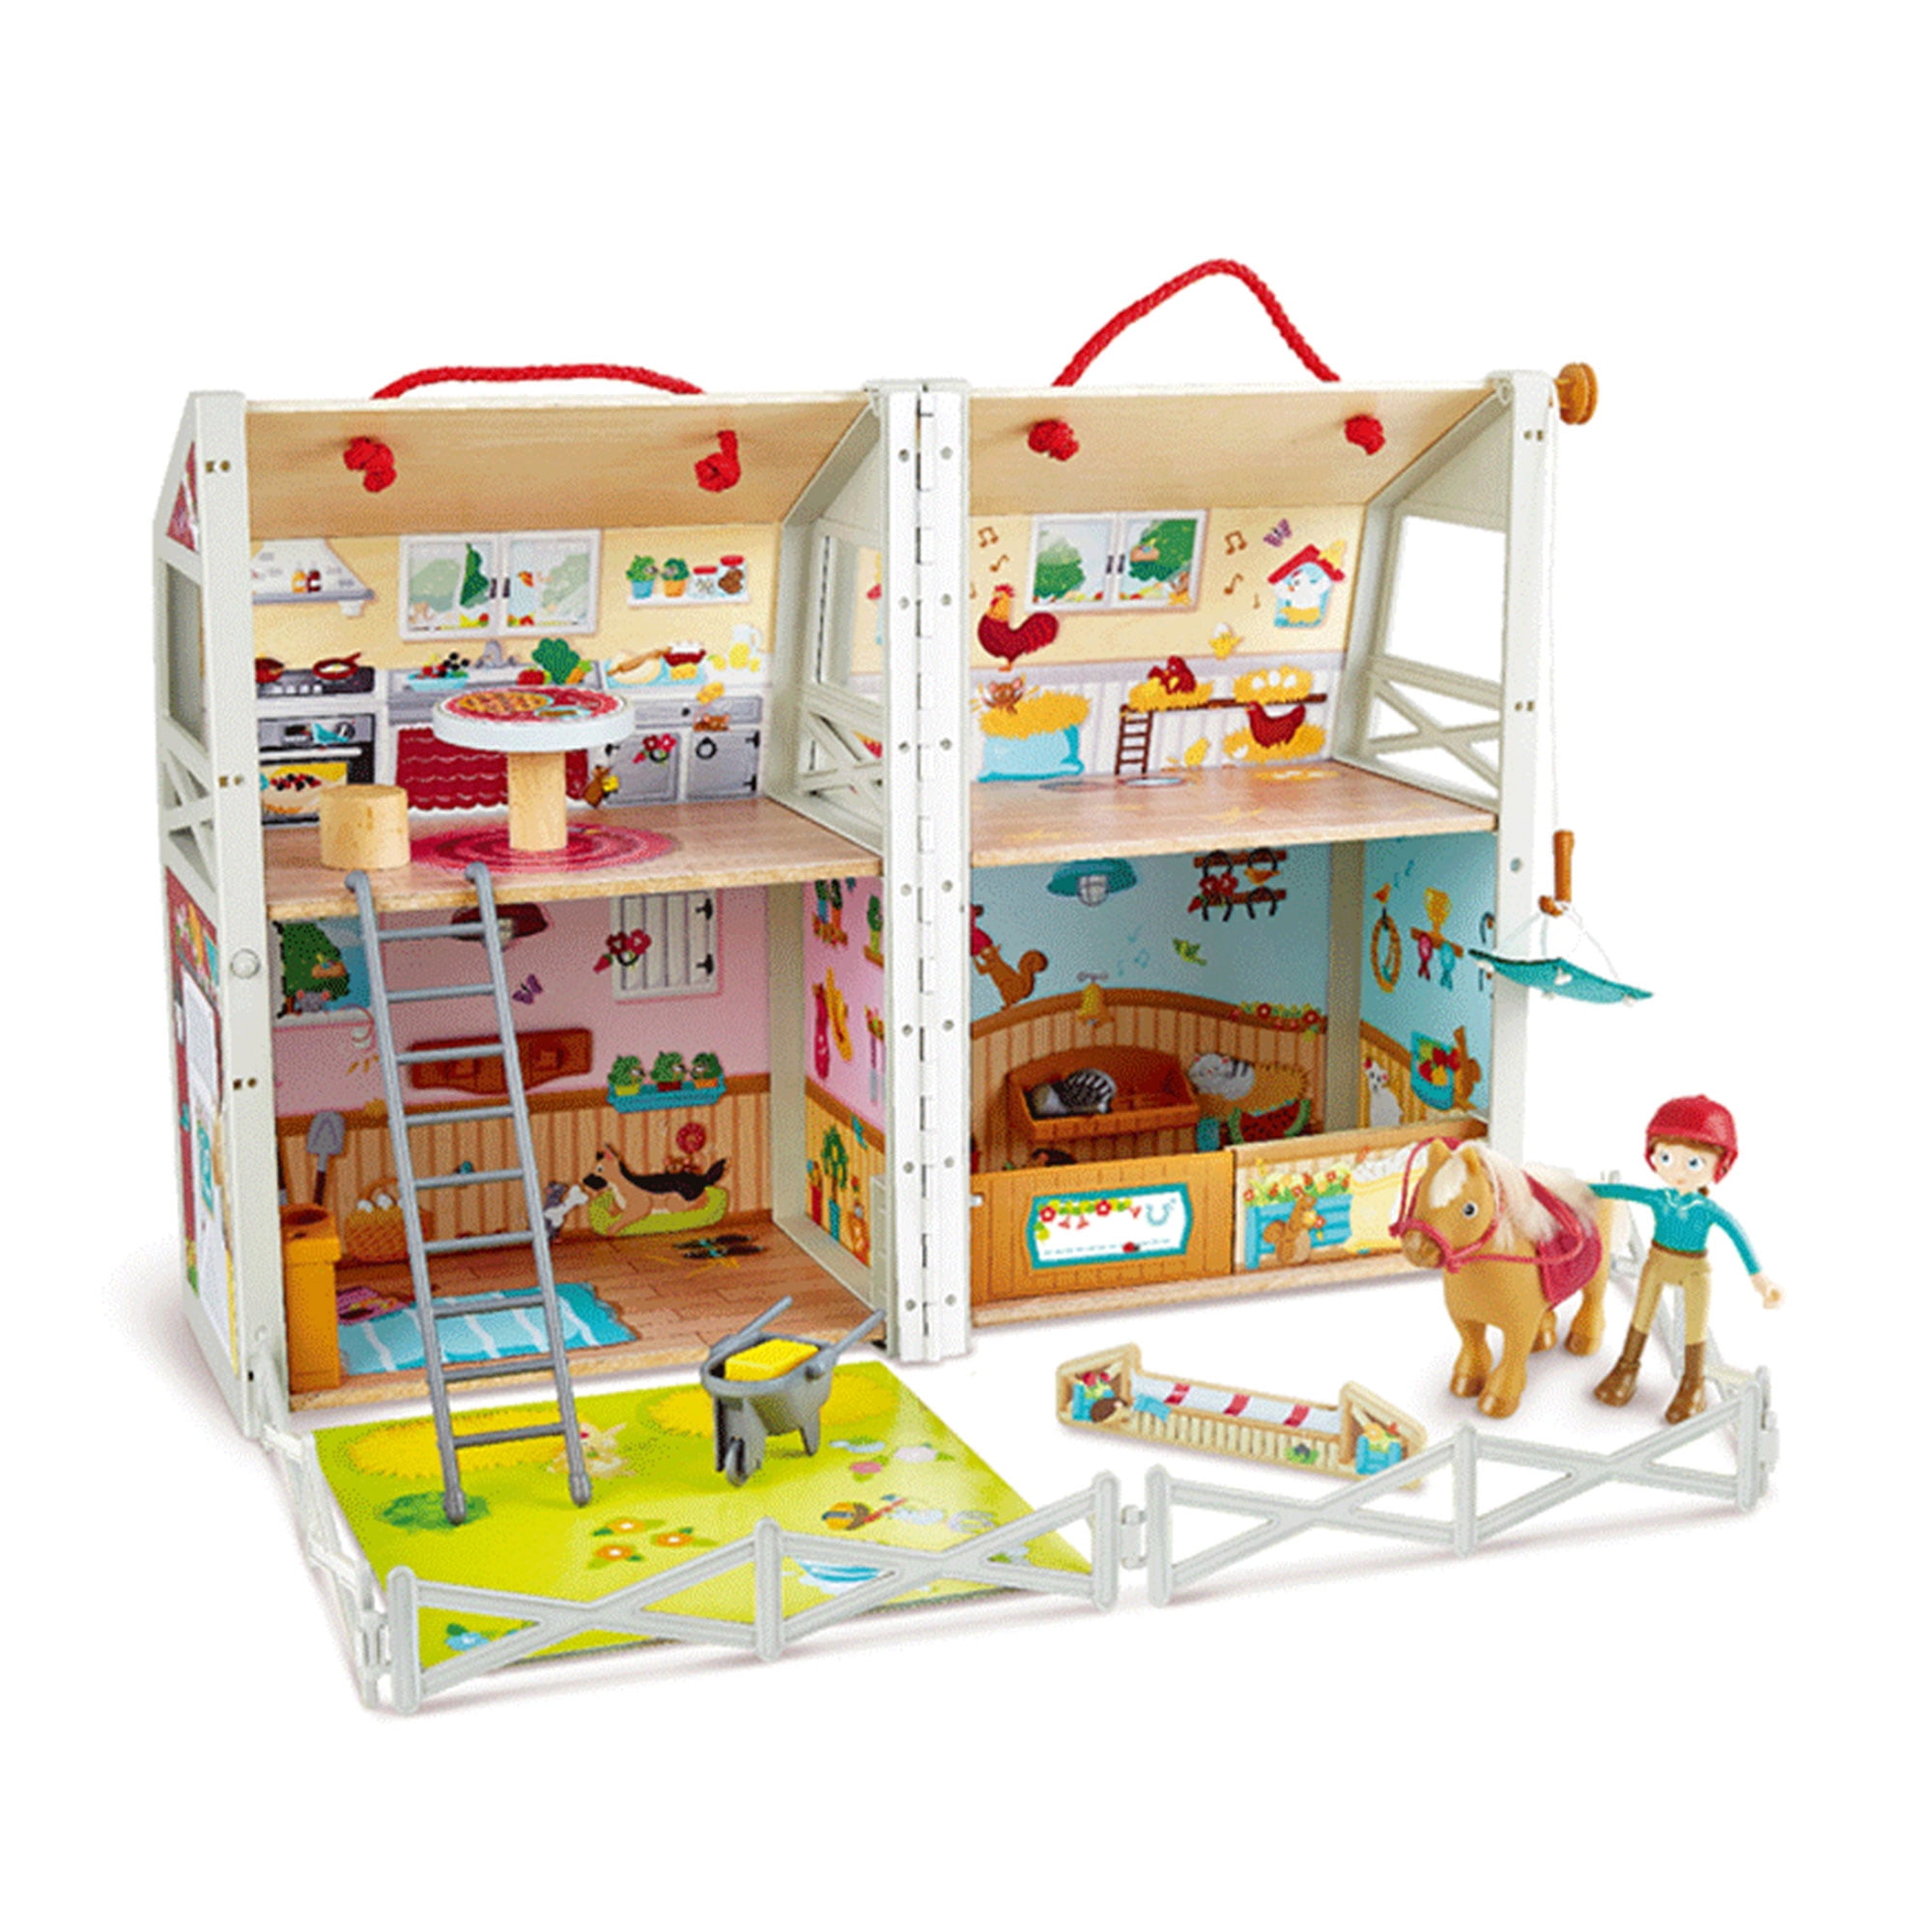 Prettyia Wooden Doll House Playset Fire Station with Fire Truck for Kids Boy 